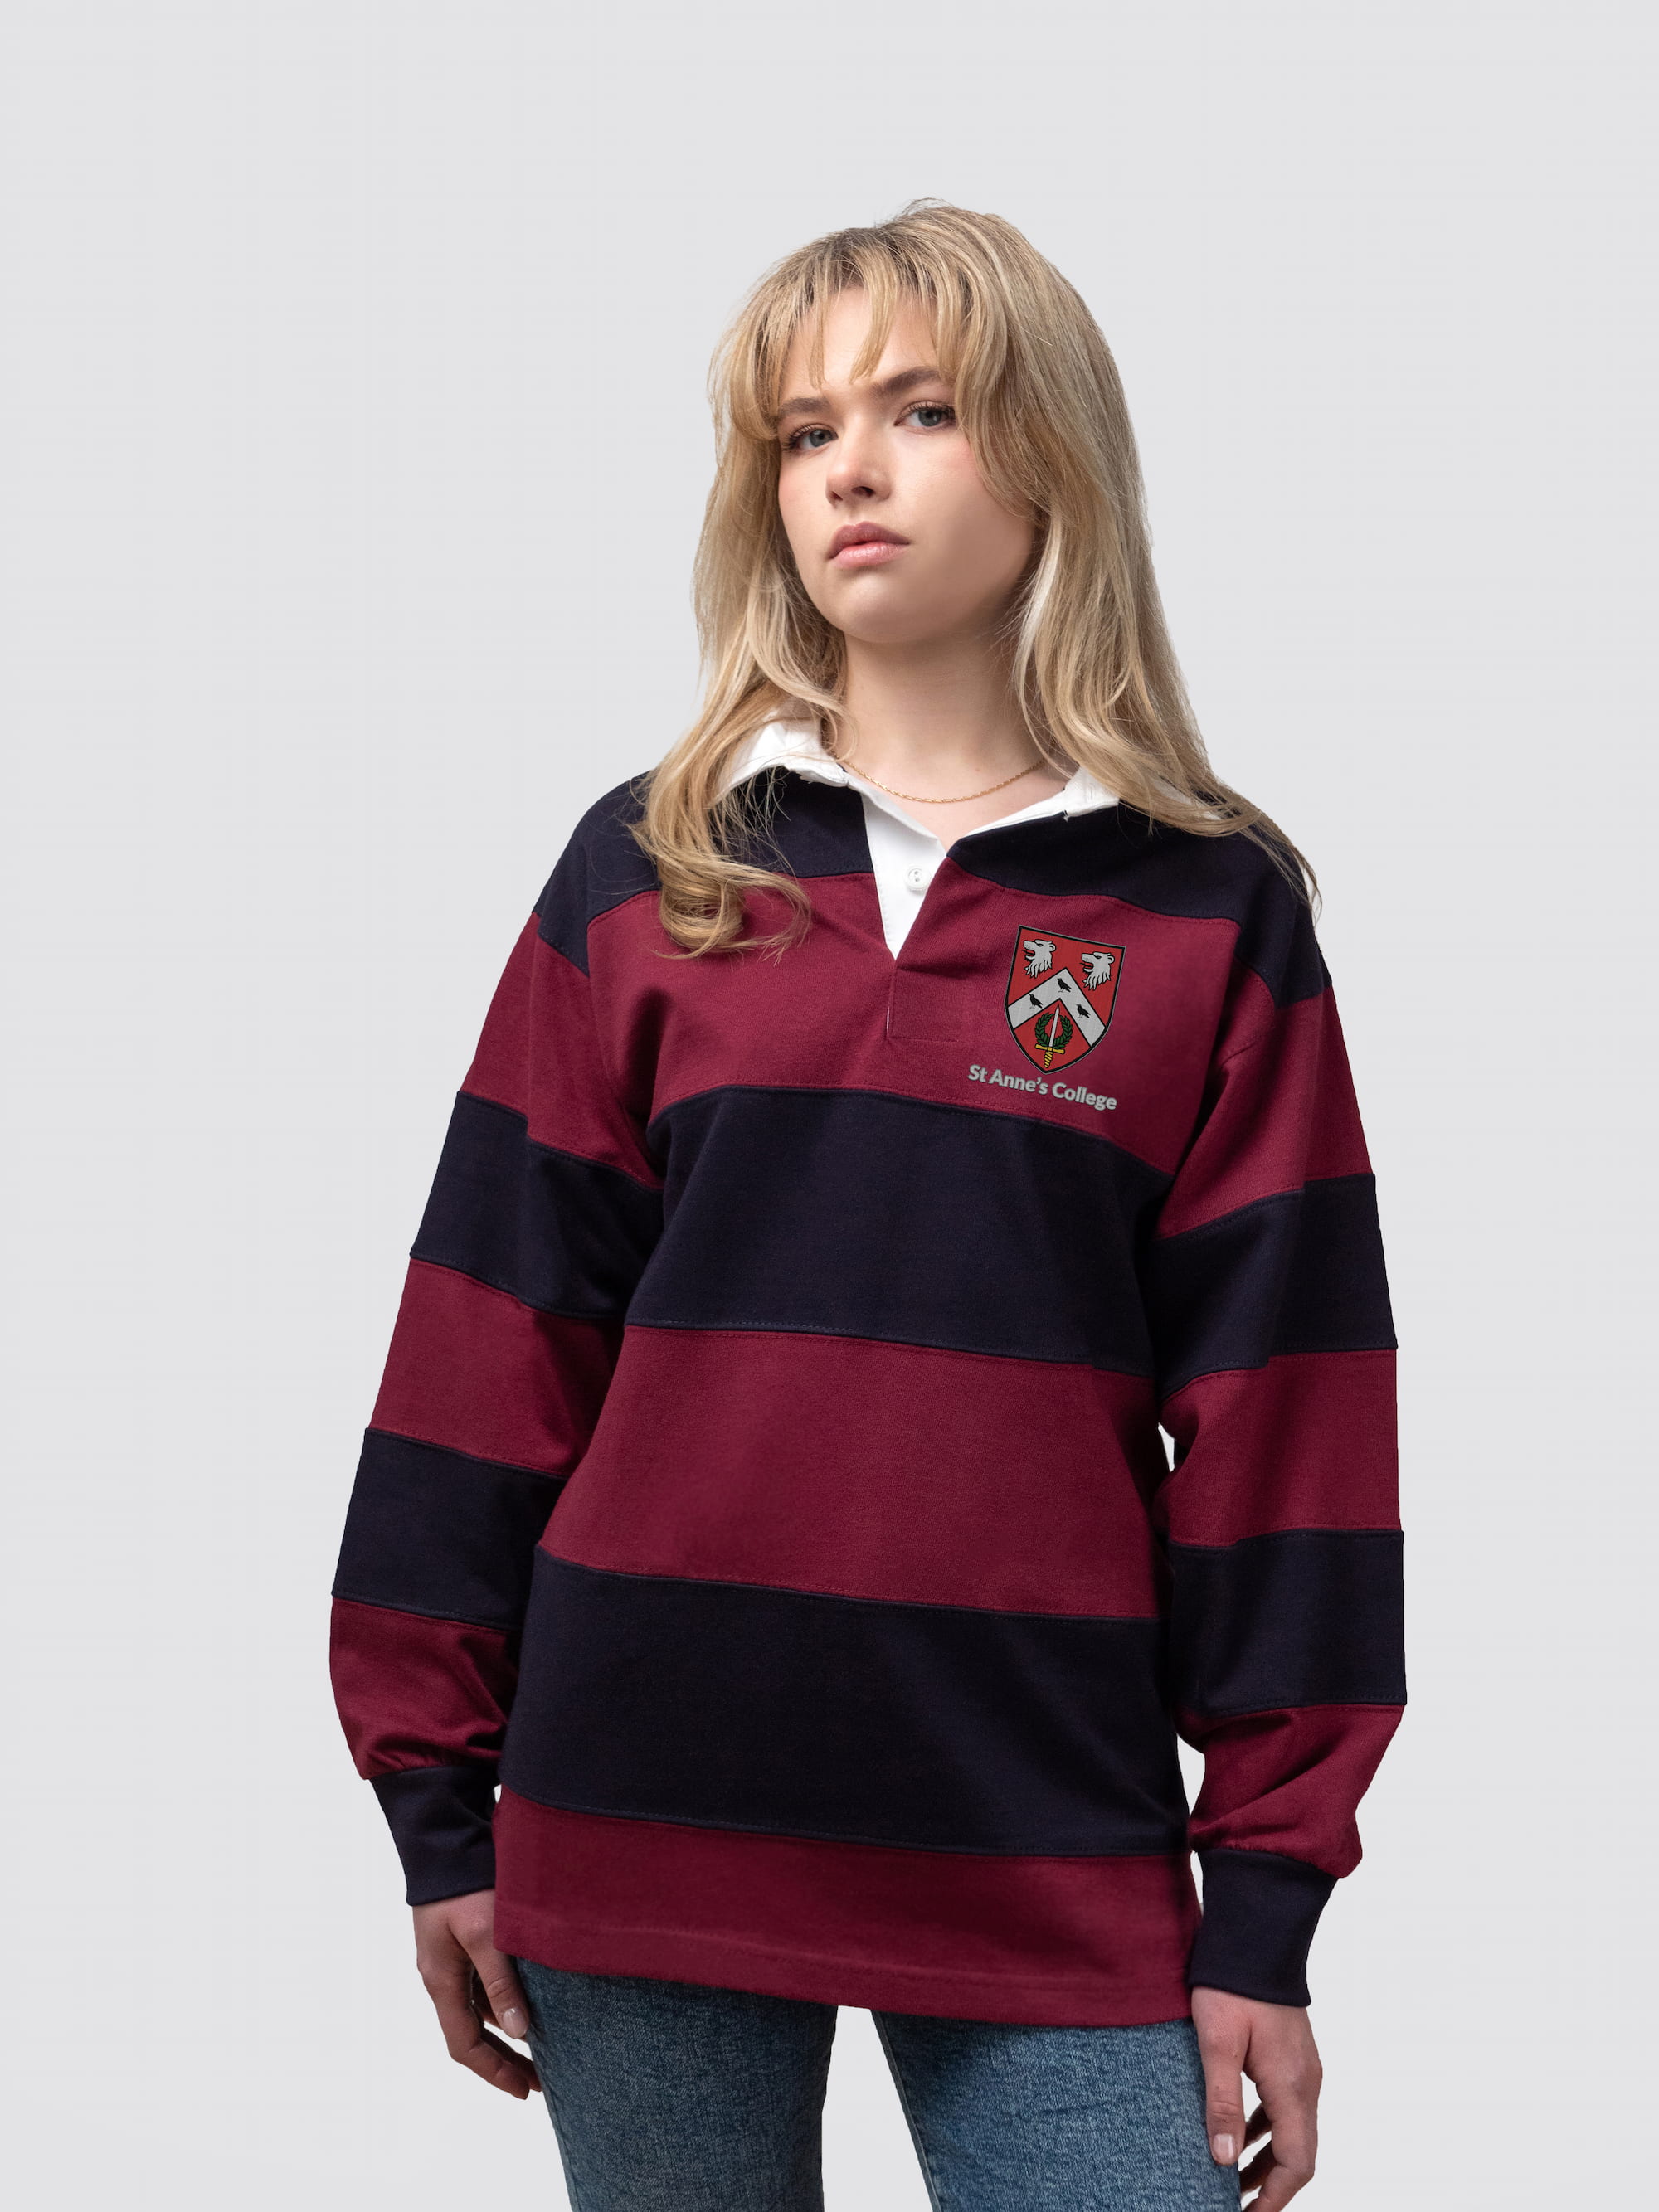 St Anne's College rugby shirt, with burgundy and navy stripes